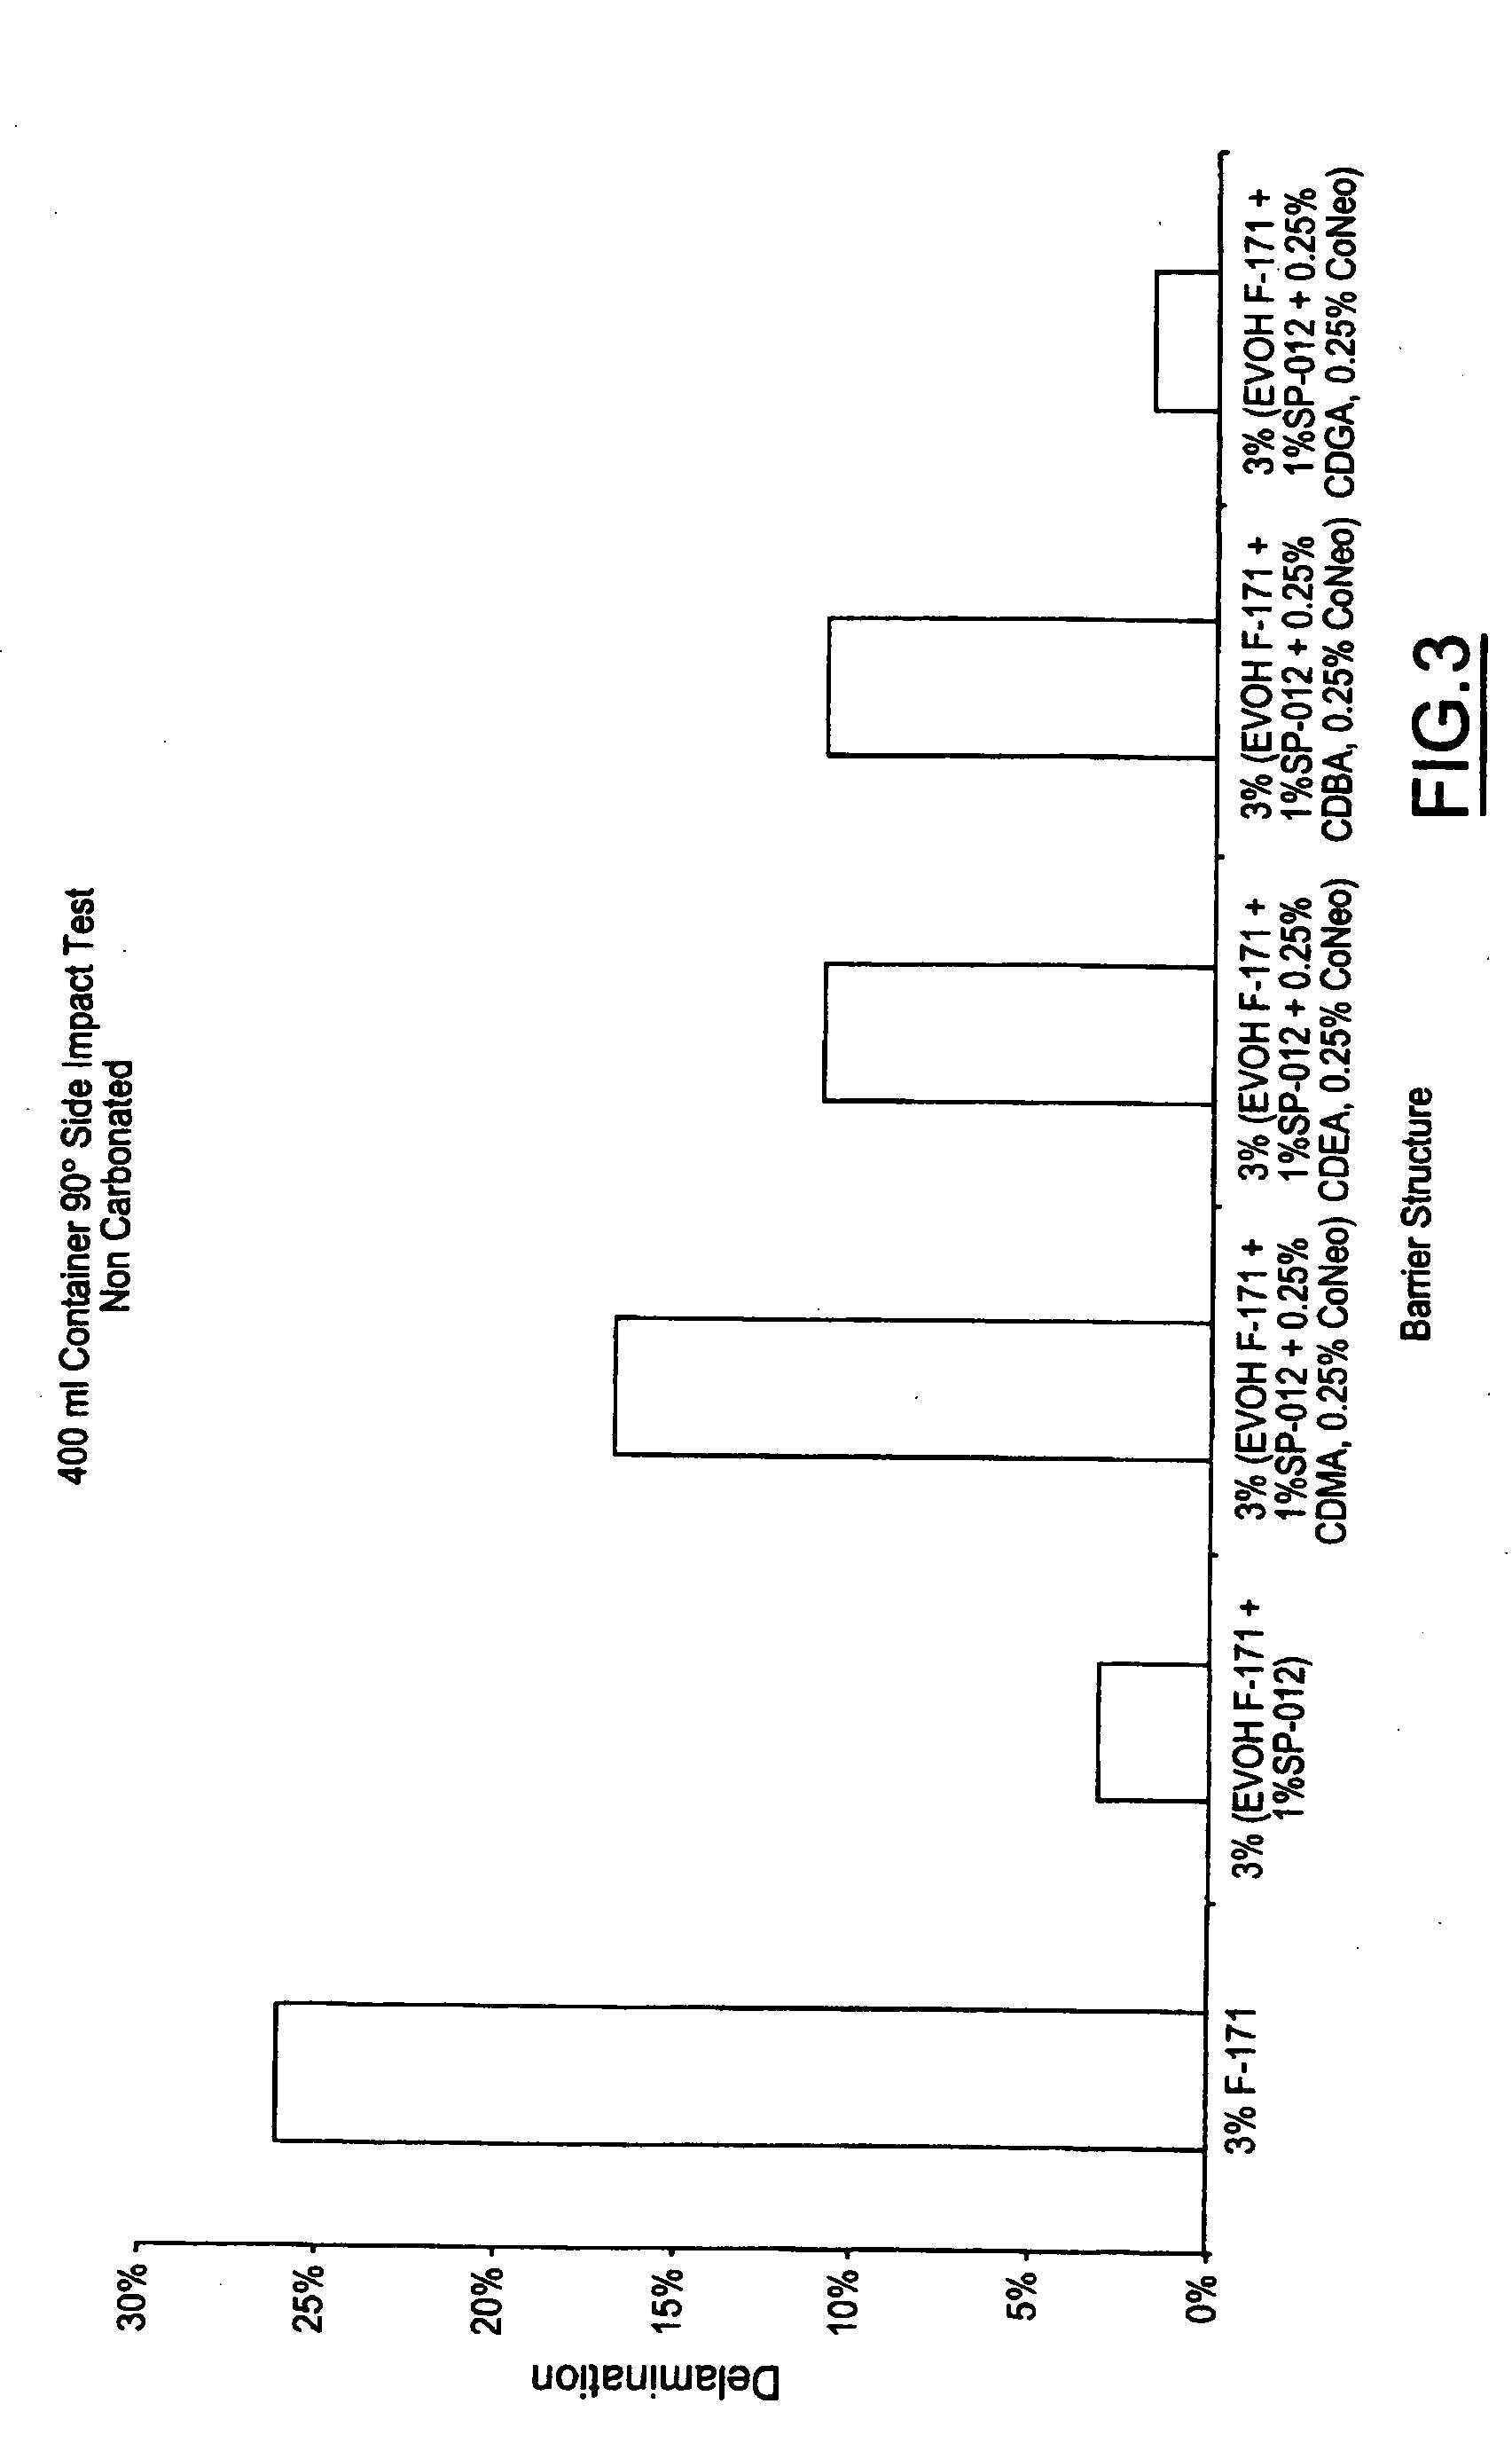 Delamination-resistant multilayer container, preform, article and method with oxygen barrier formulations